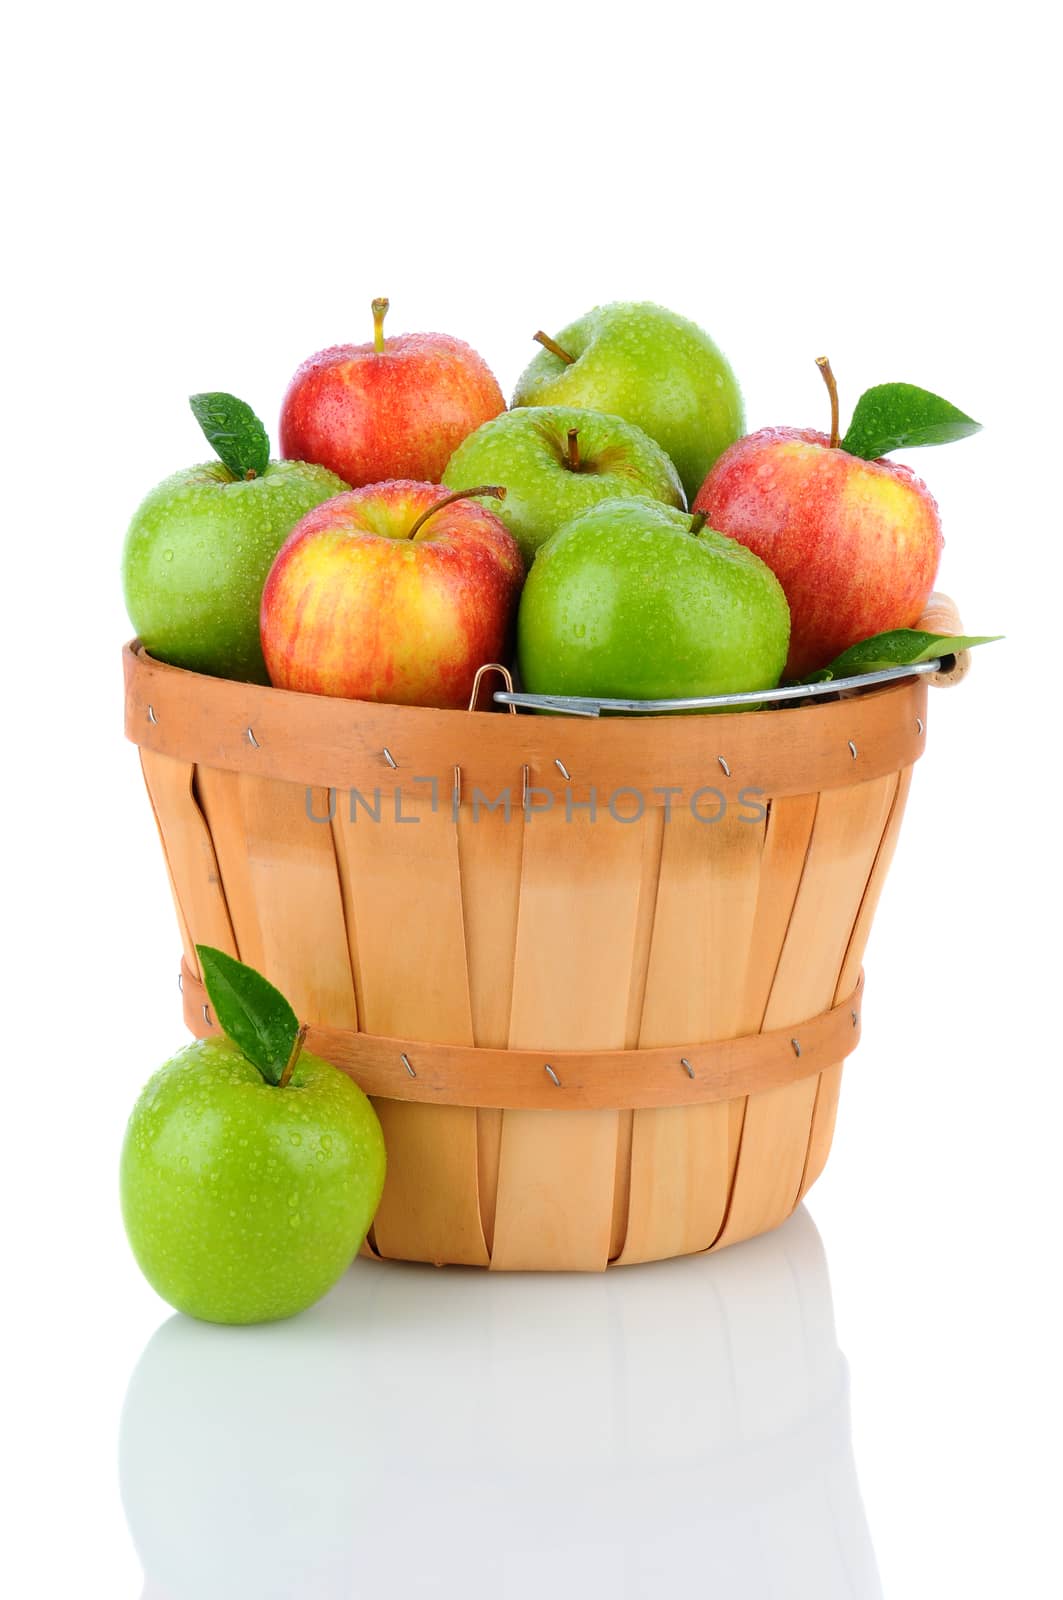 A basket of fresh picked Gala and Granny Smith Apples. Vertical format over a white background with reflection.